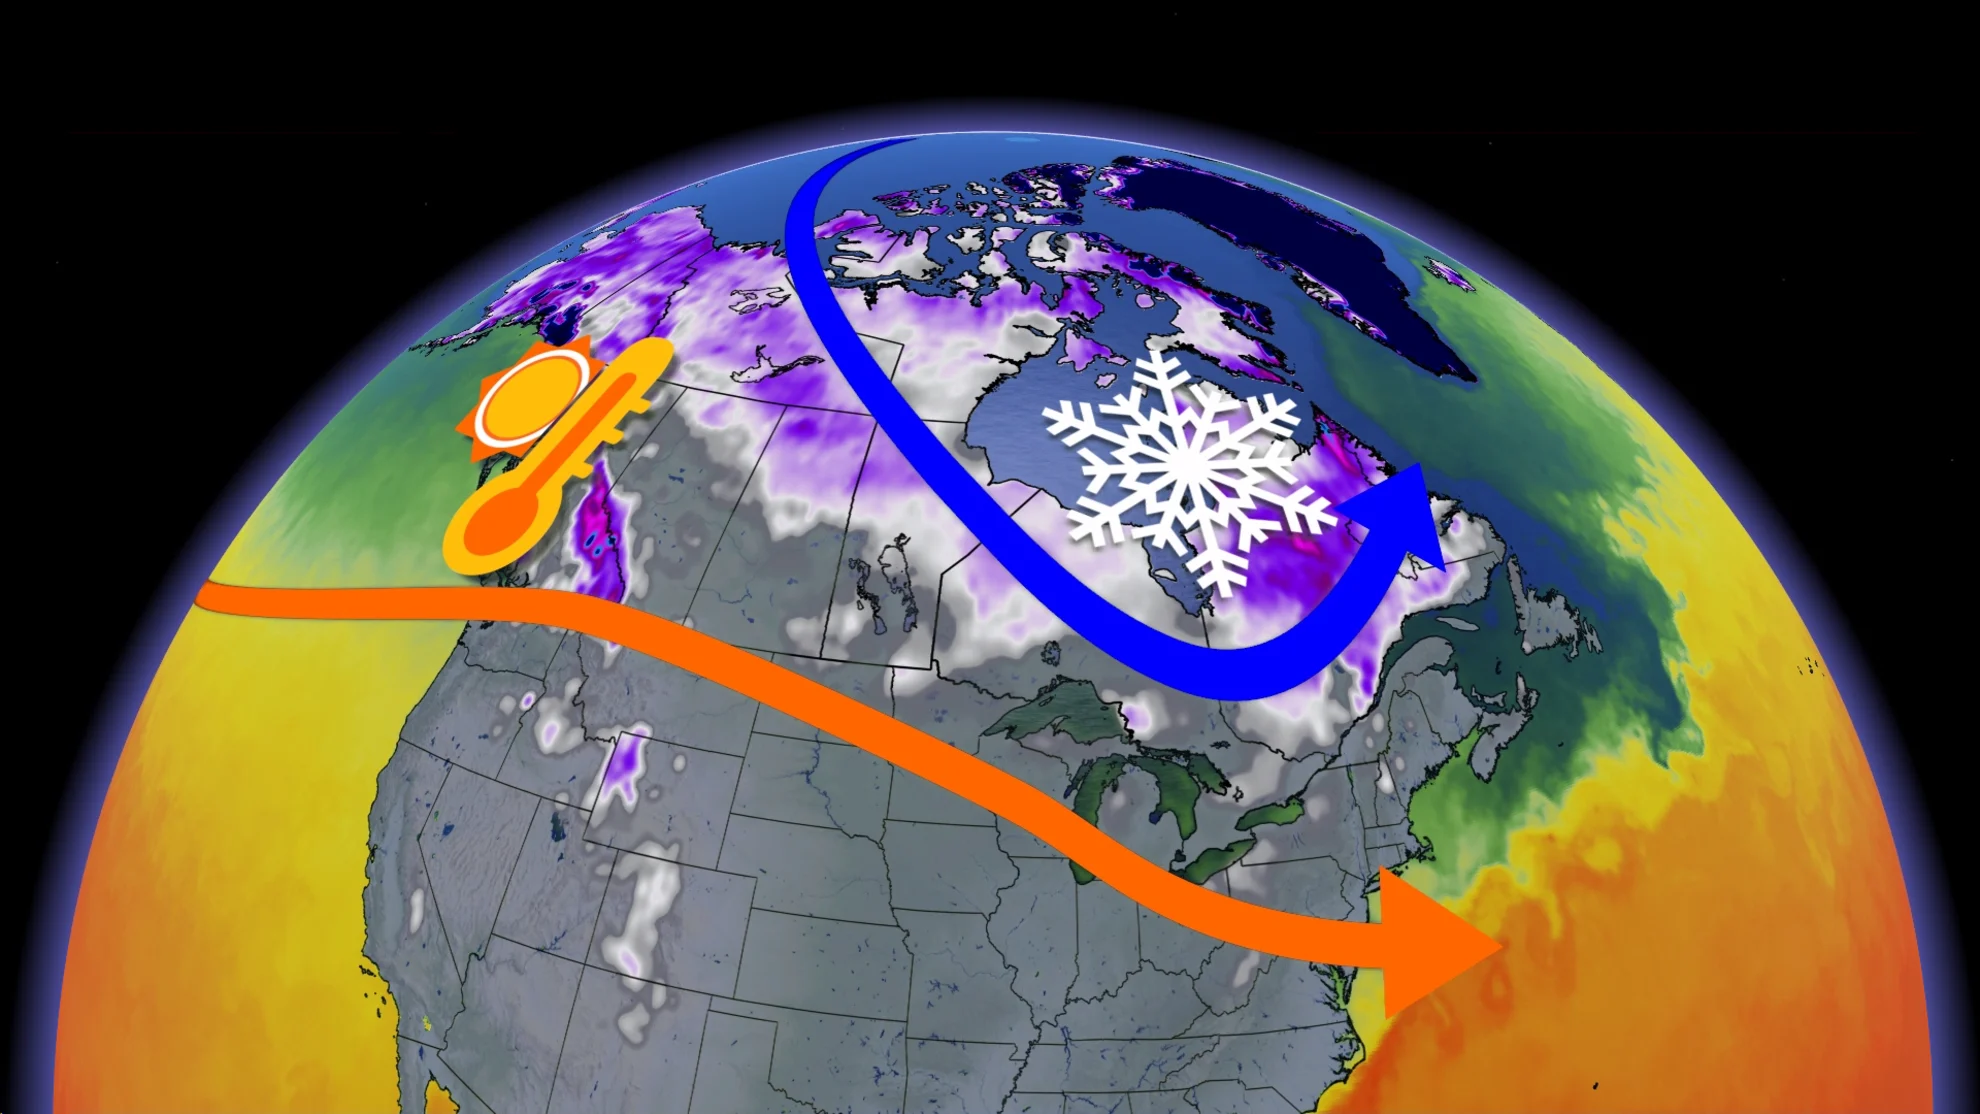 Canada's December has been warm, but will winter eventually show up?